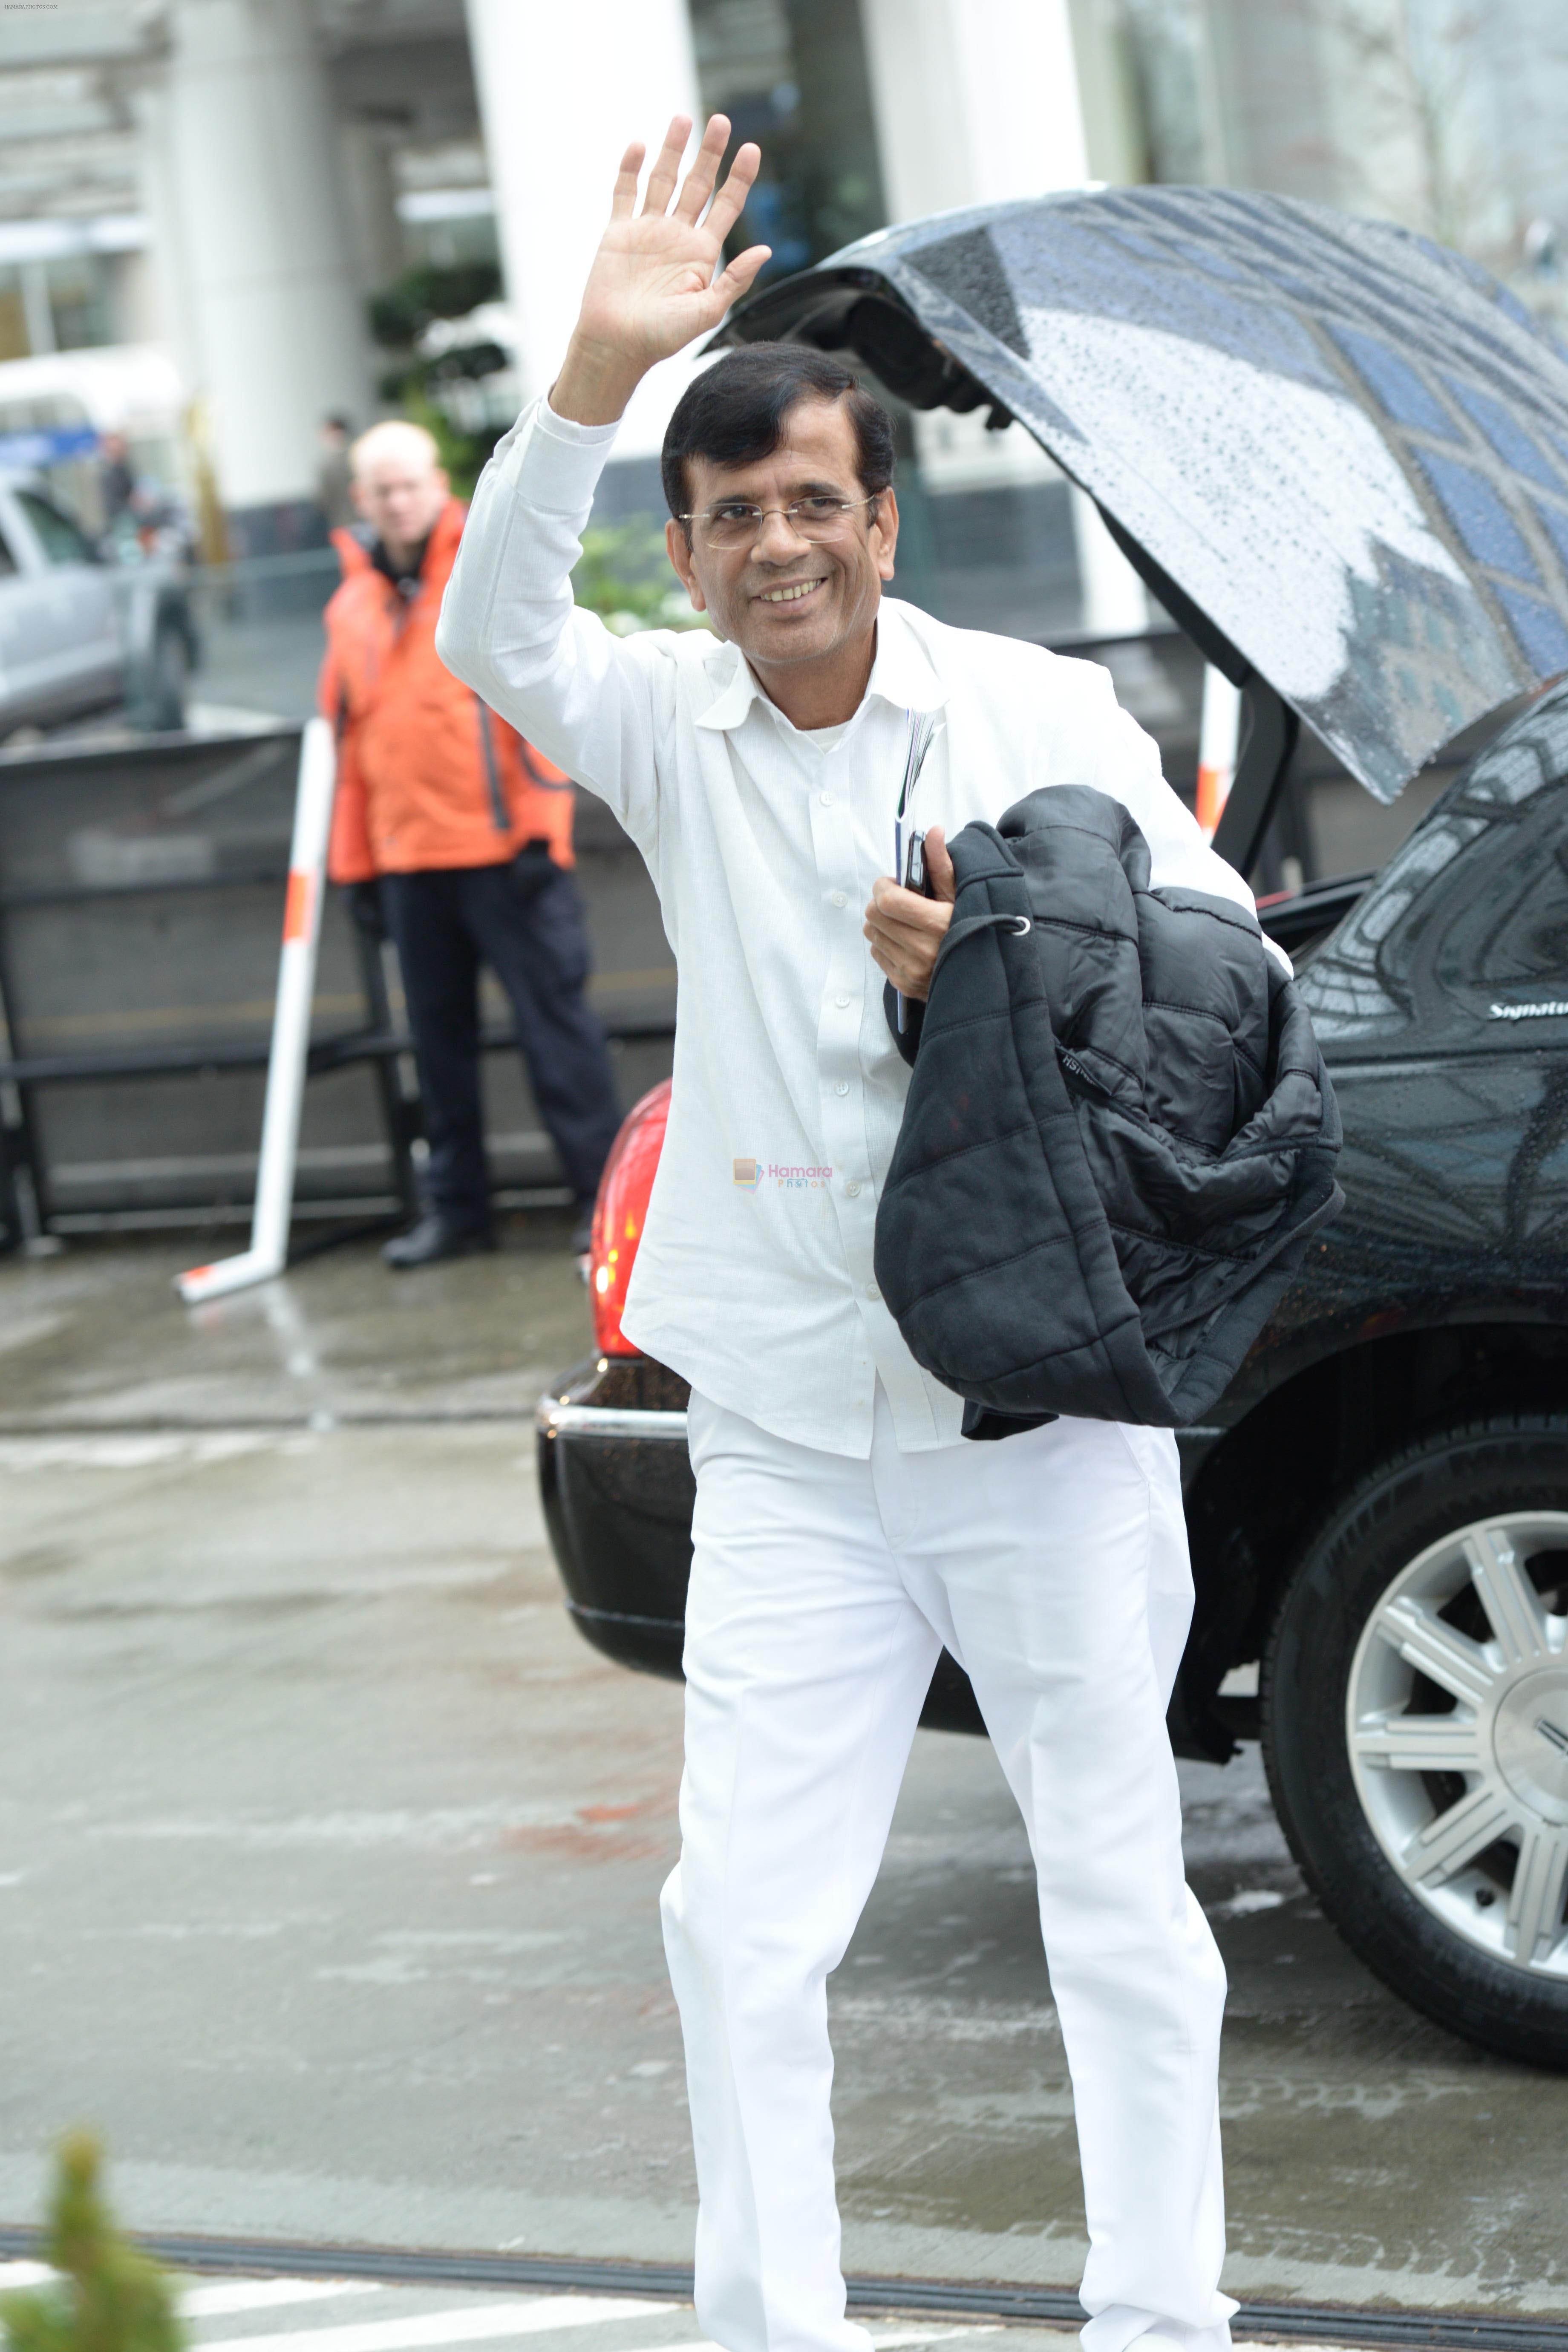 Abbas Mastan arrive in Vancouver for TOIFA 2013 on 4th April 2013